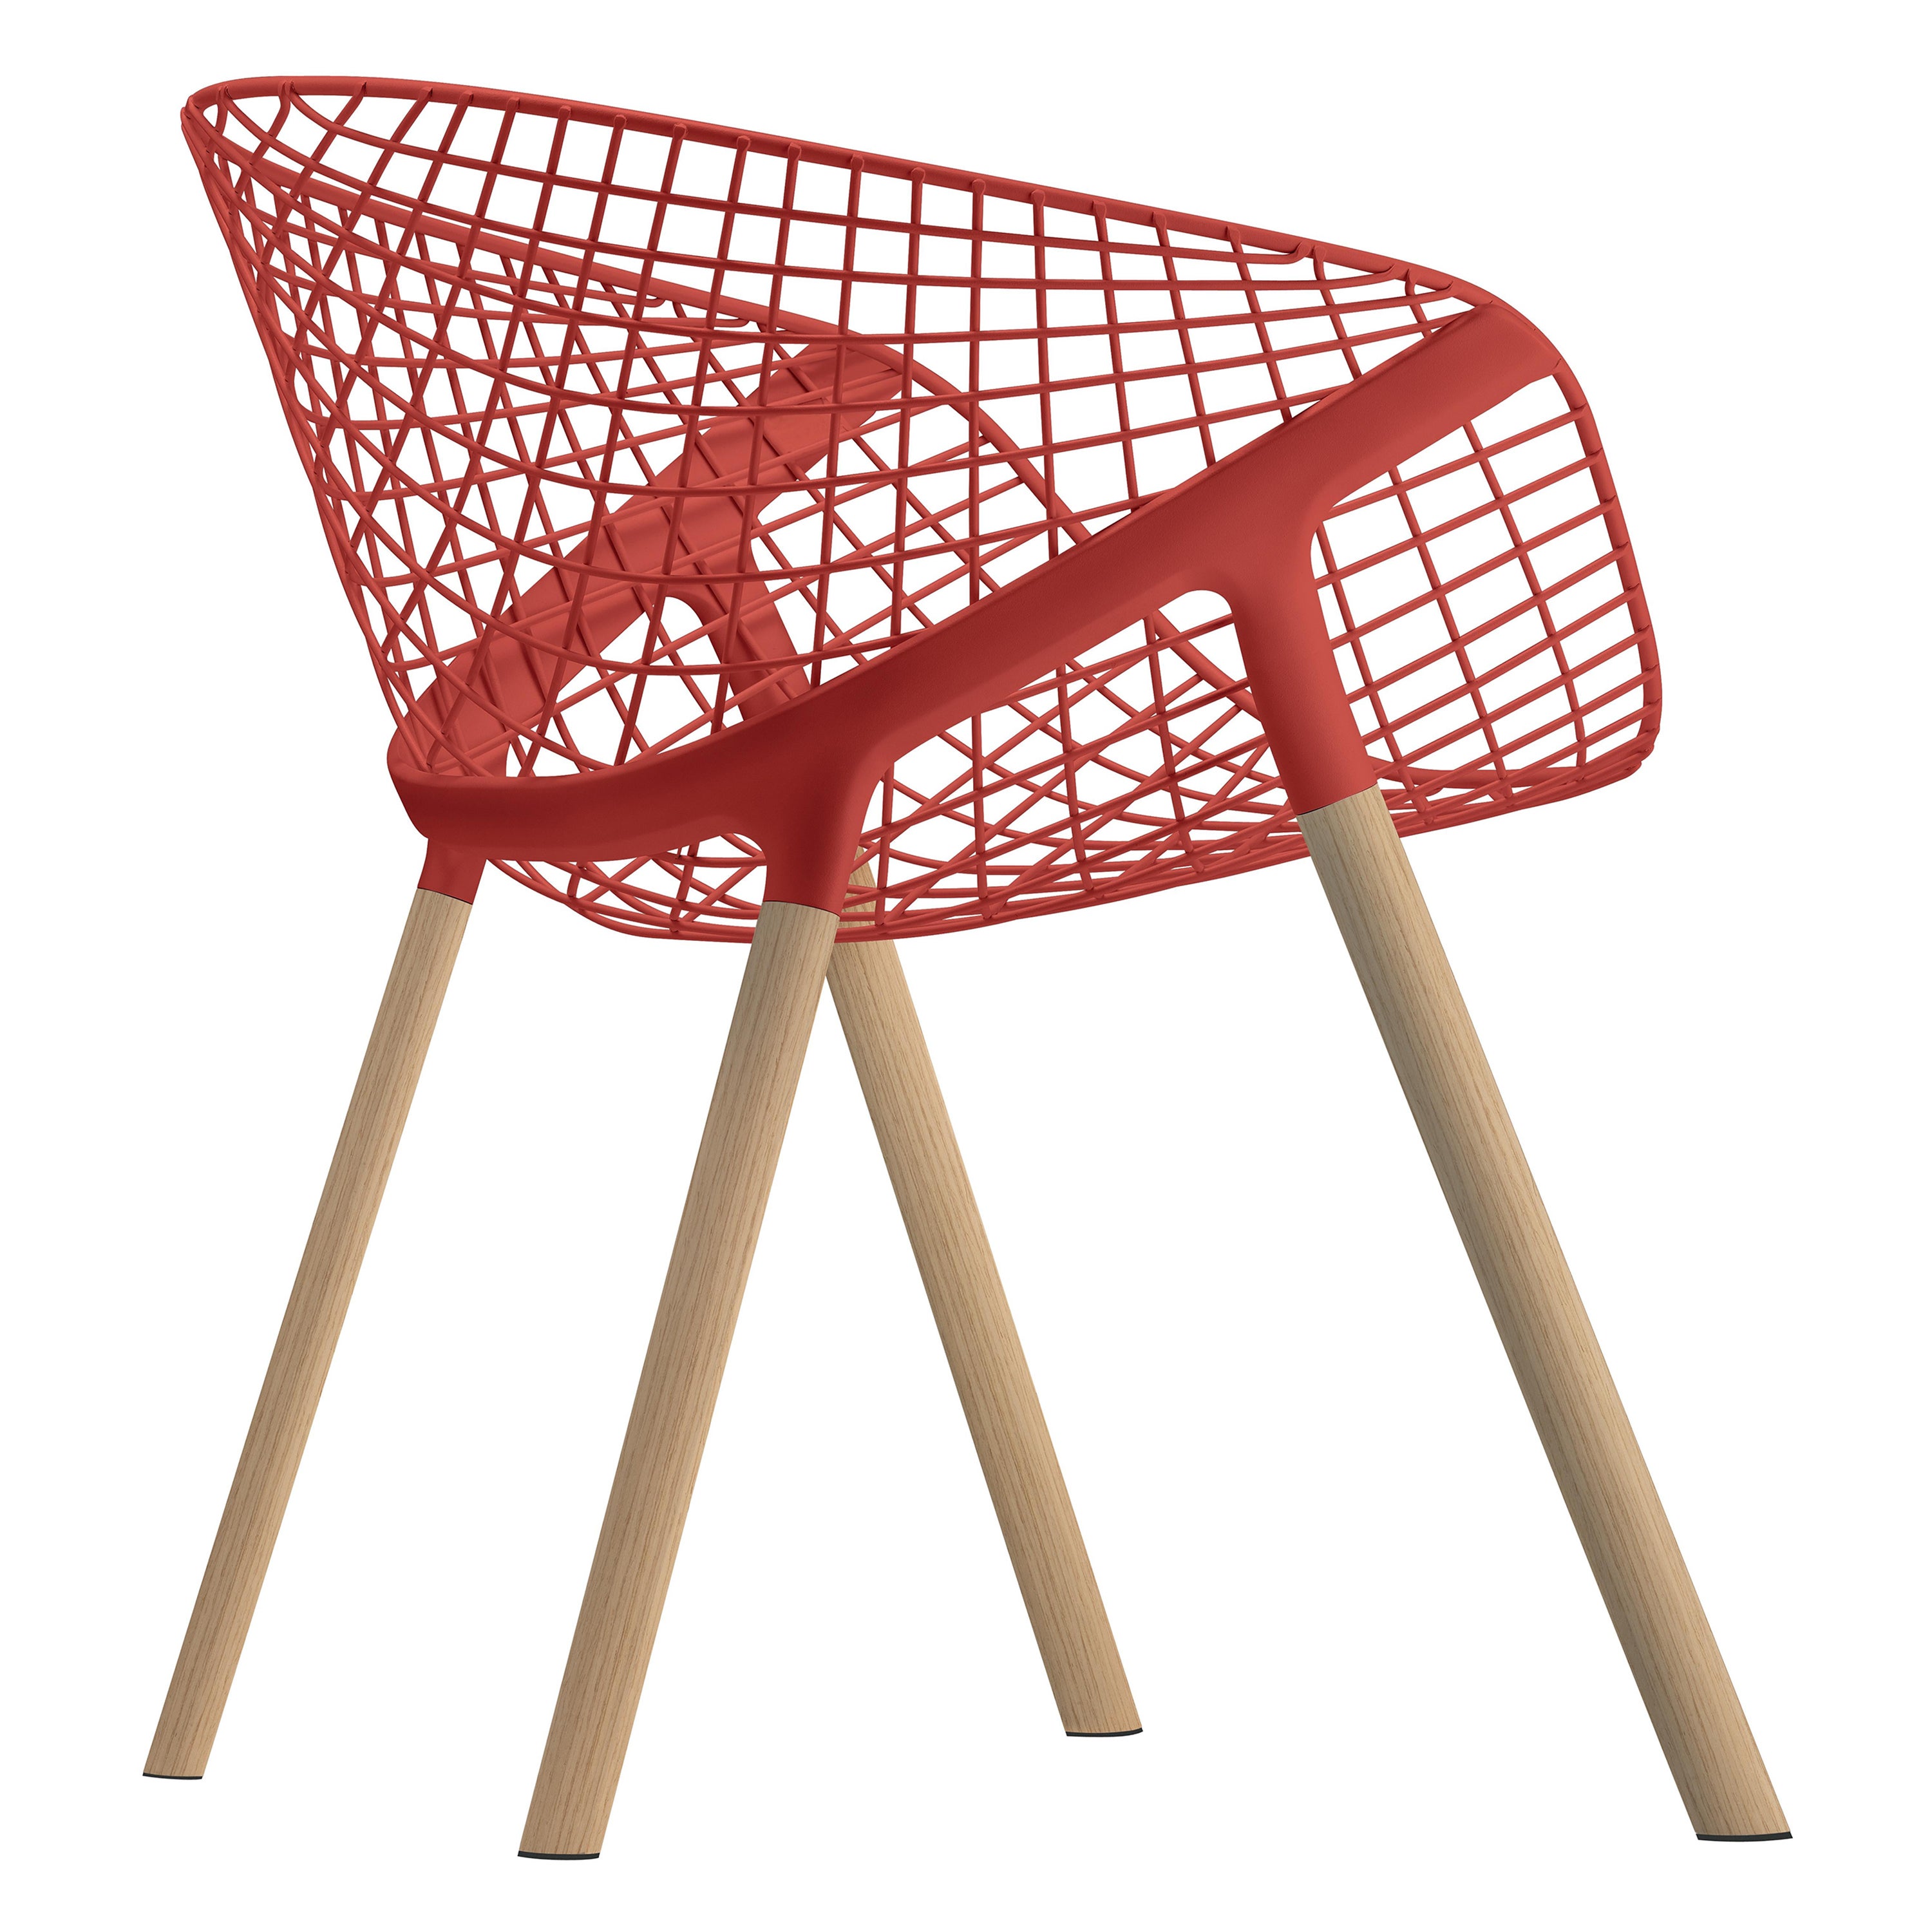 Alias 041 Kobi Wood Chair in Coral Red Lacquered and Natural Oak Frame